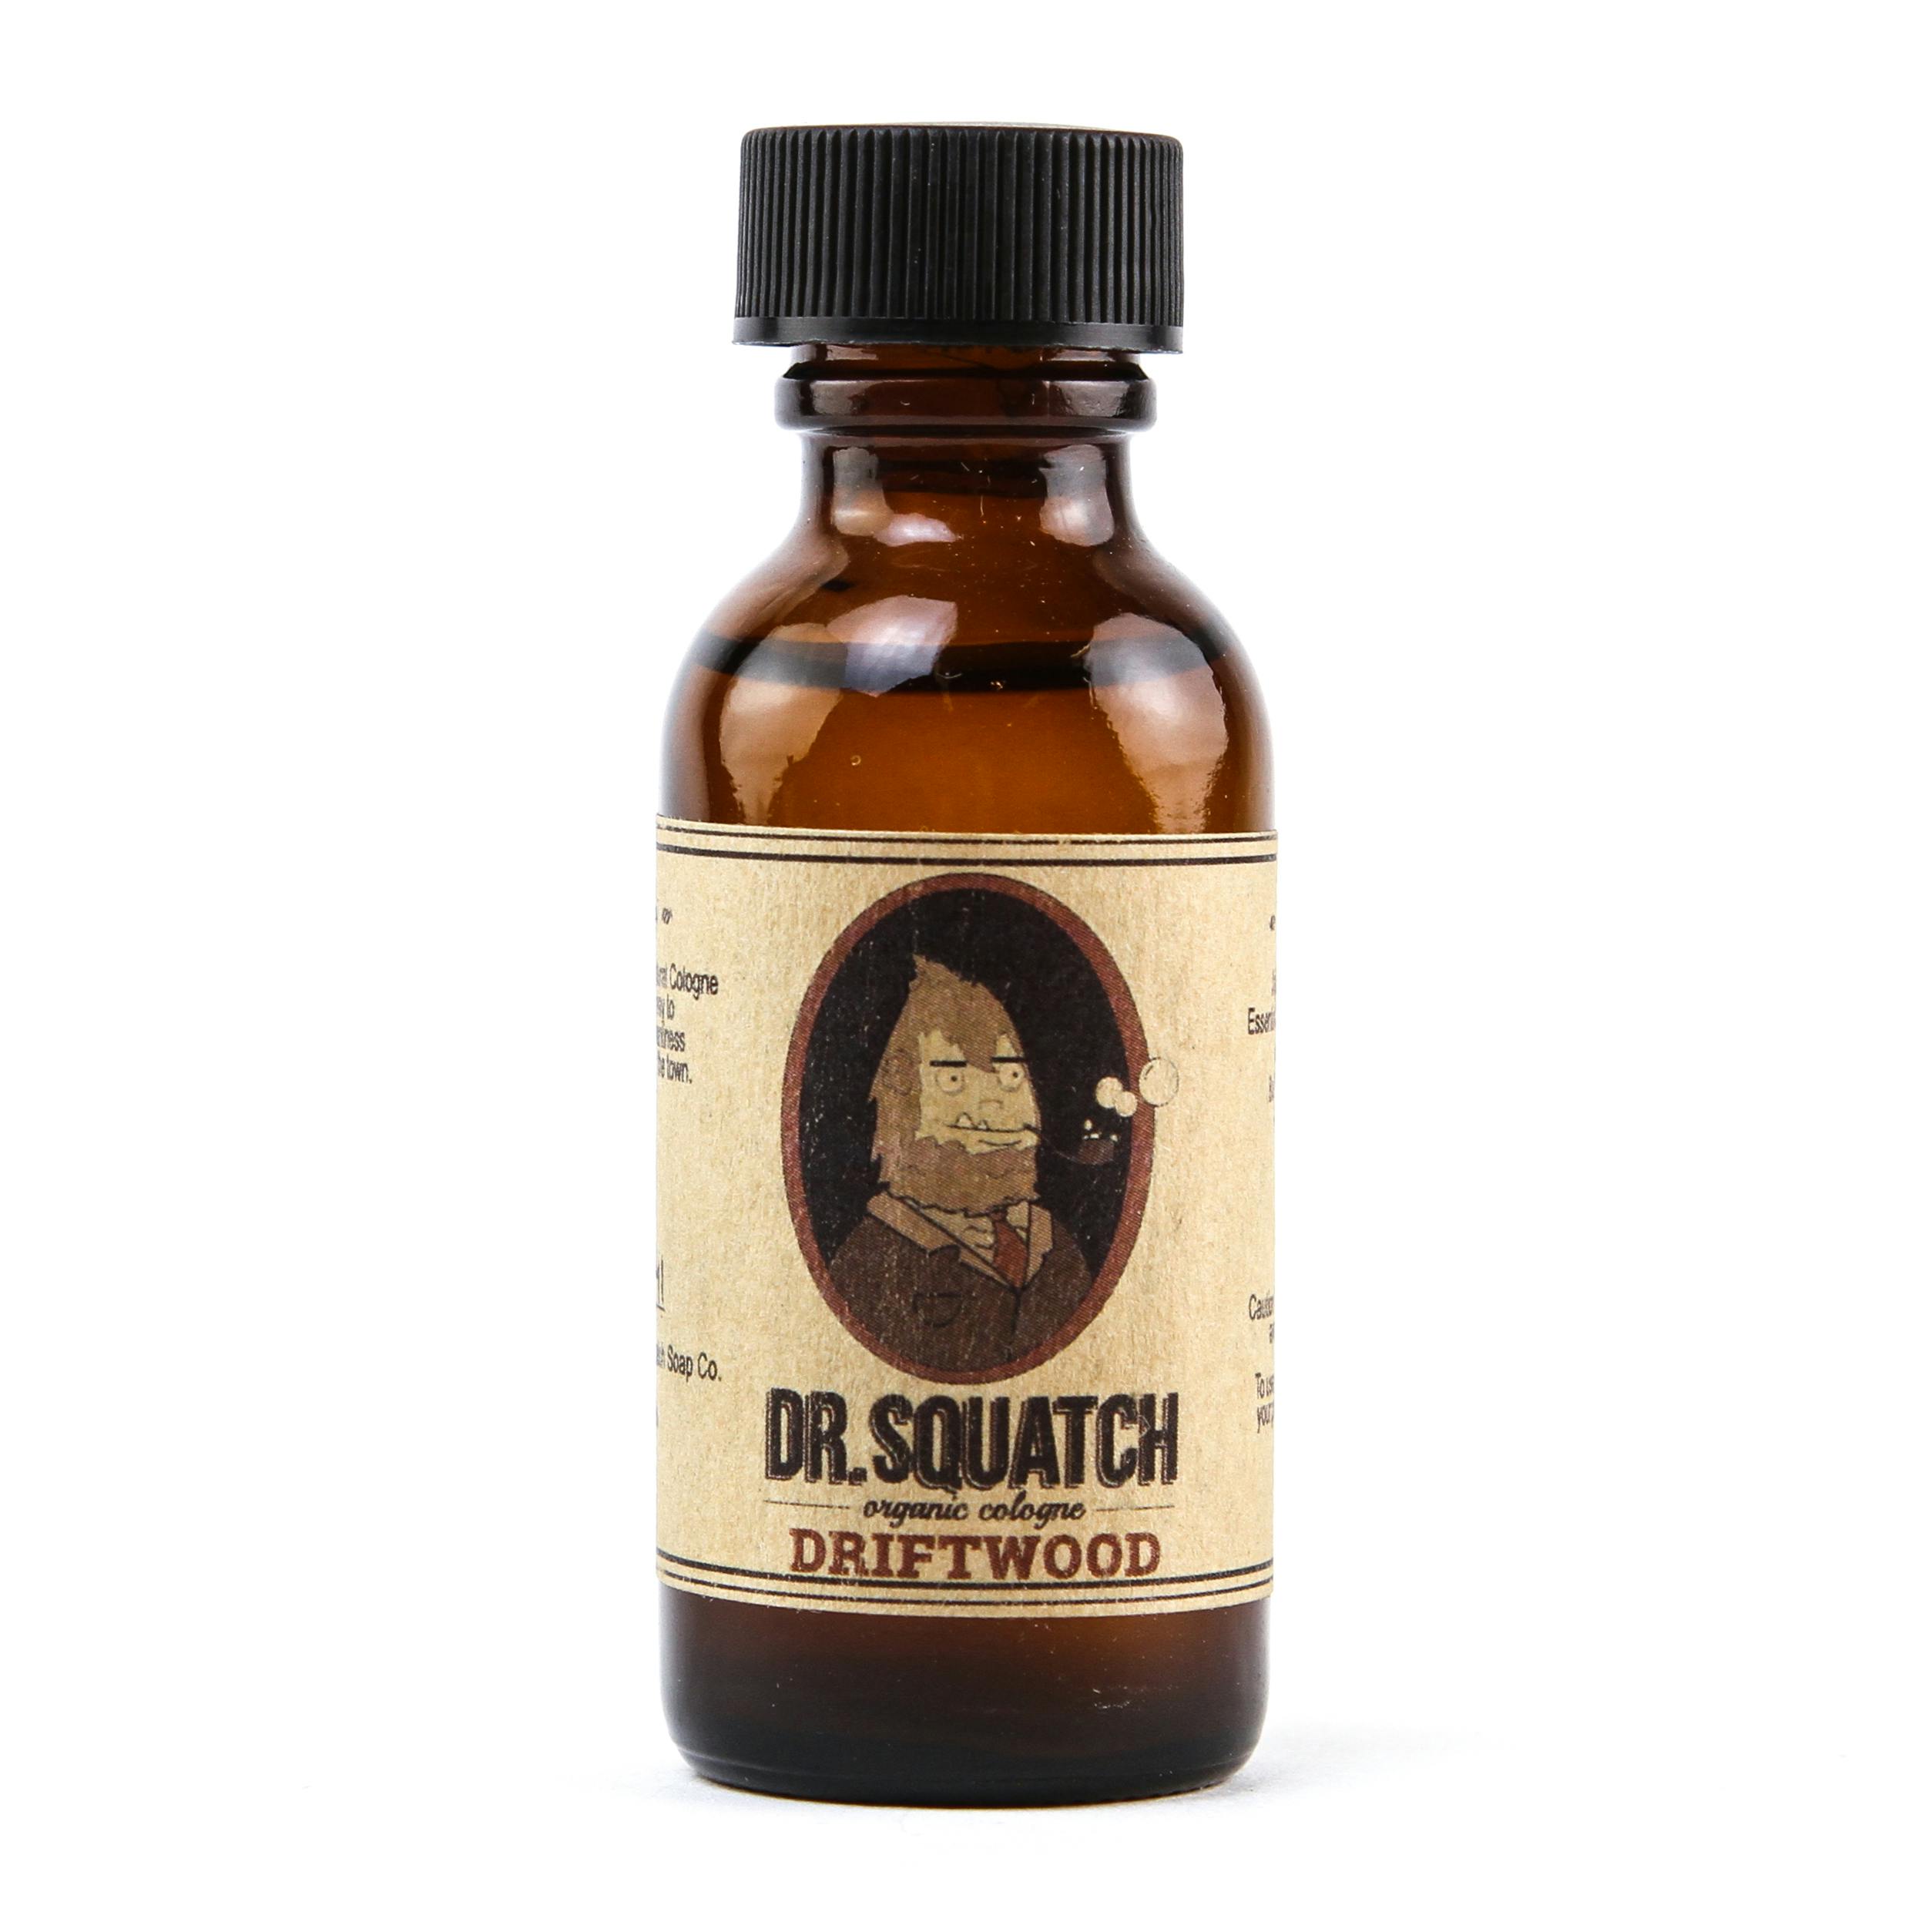 Dr. Squatch Driftwood Organic Cologne - null, undefined